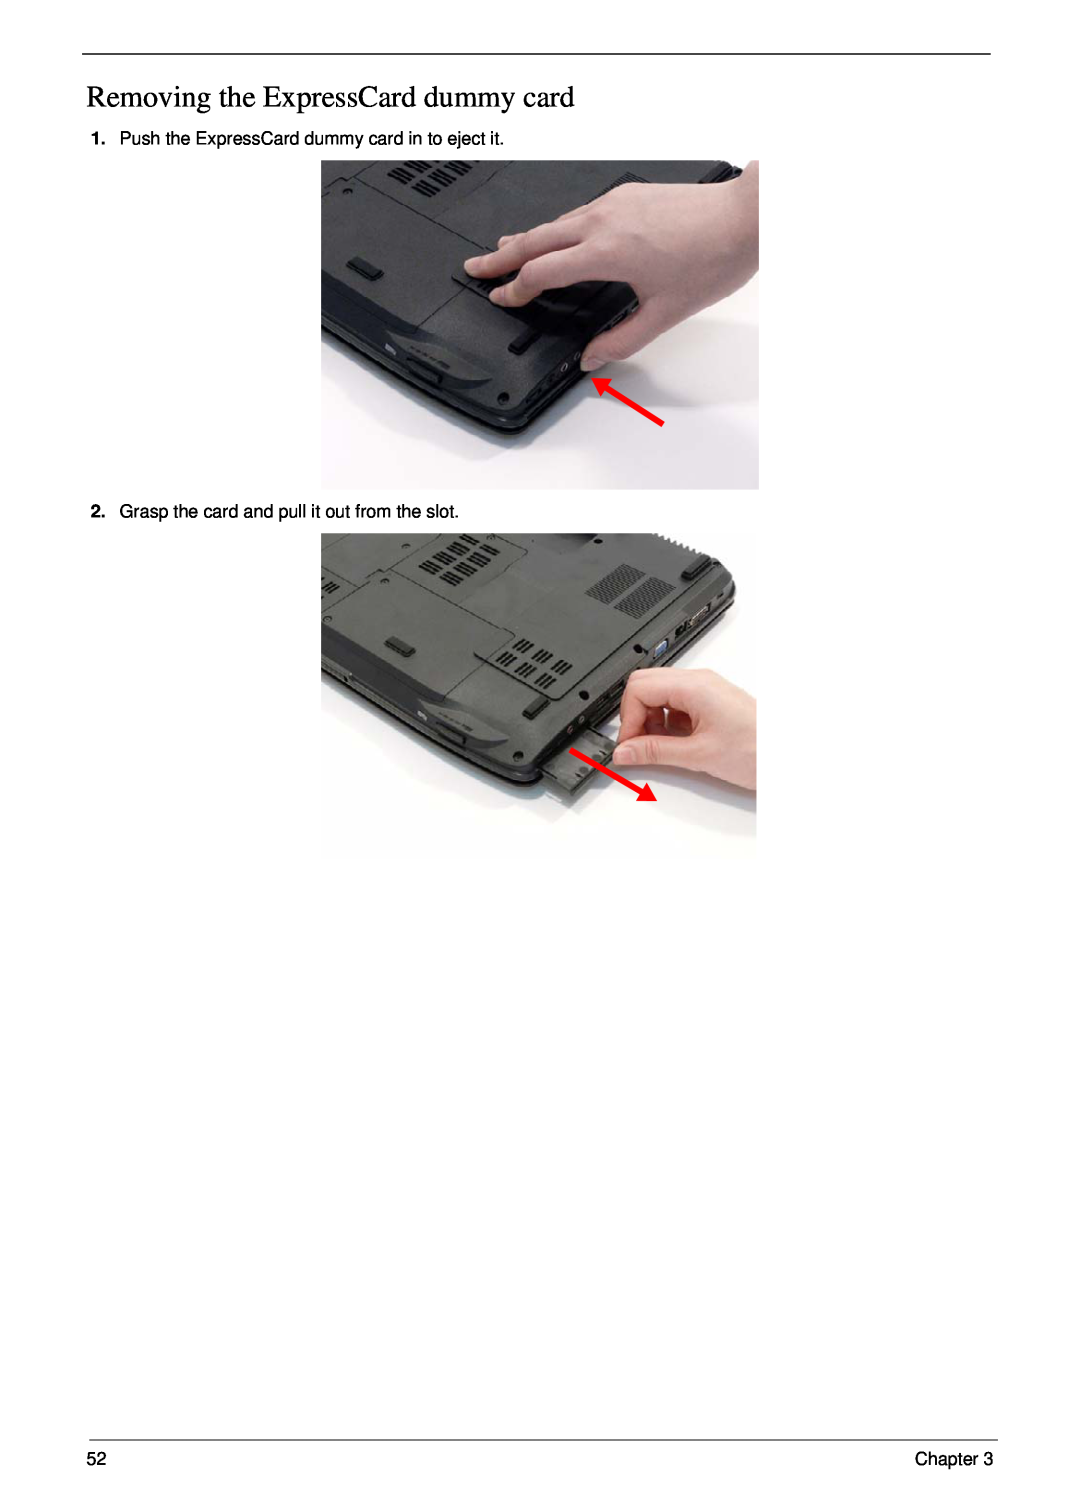 Acer 5530G manual Removing the ExpressCard dummy card, Push the ExpressCard dummy card in to eject it 